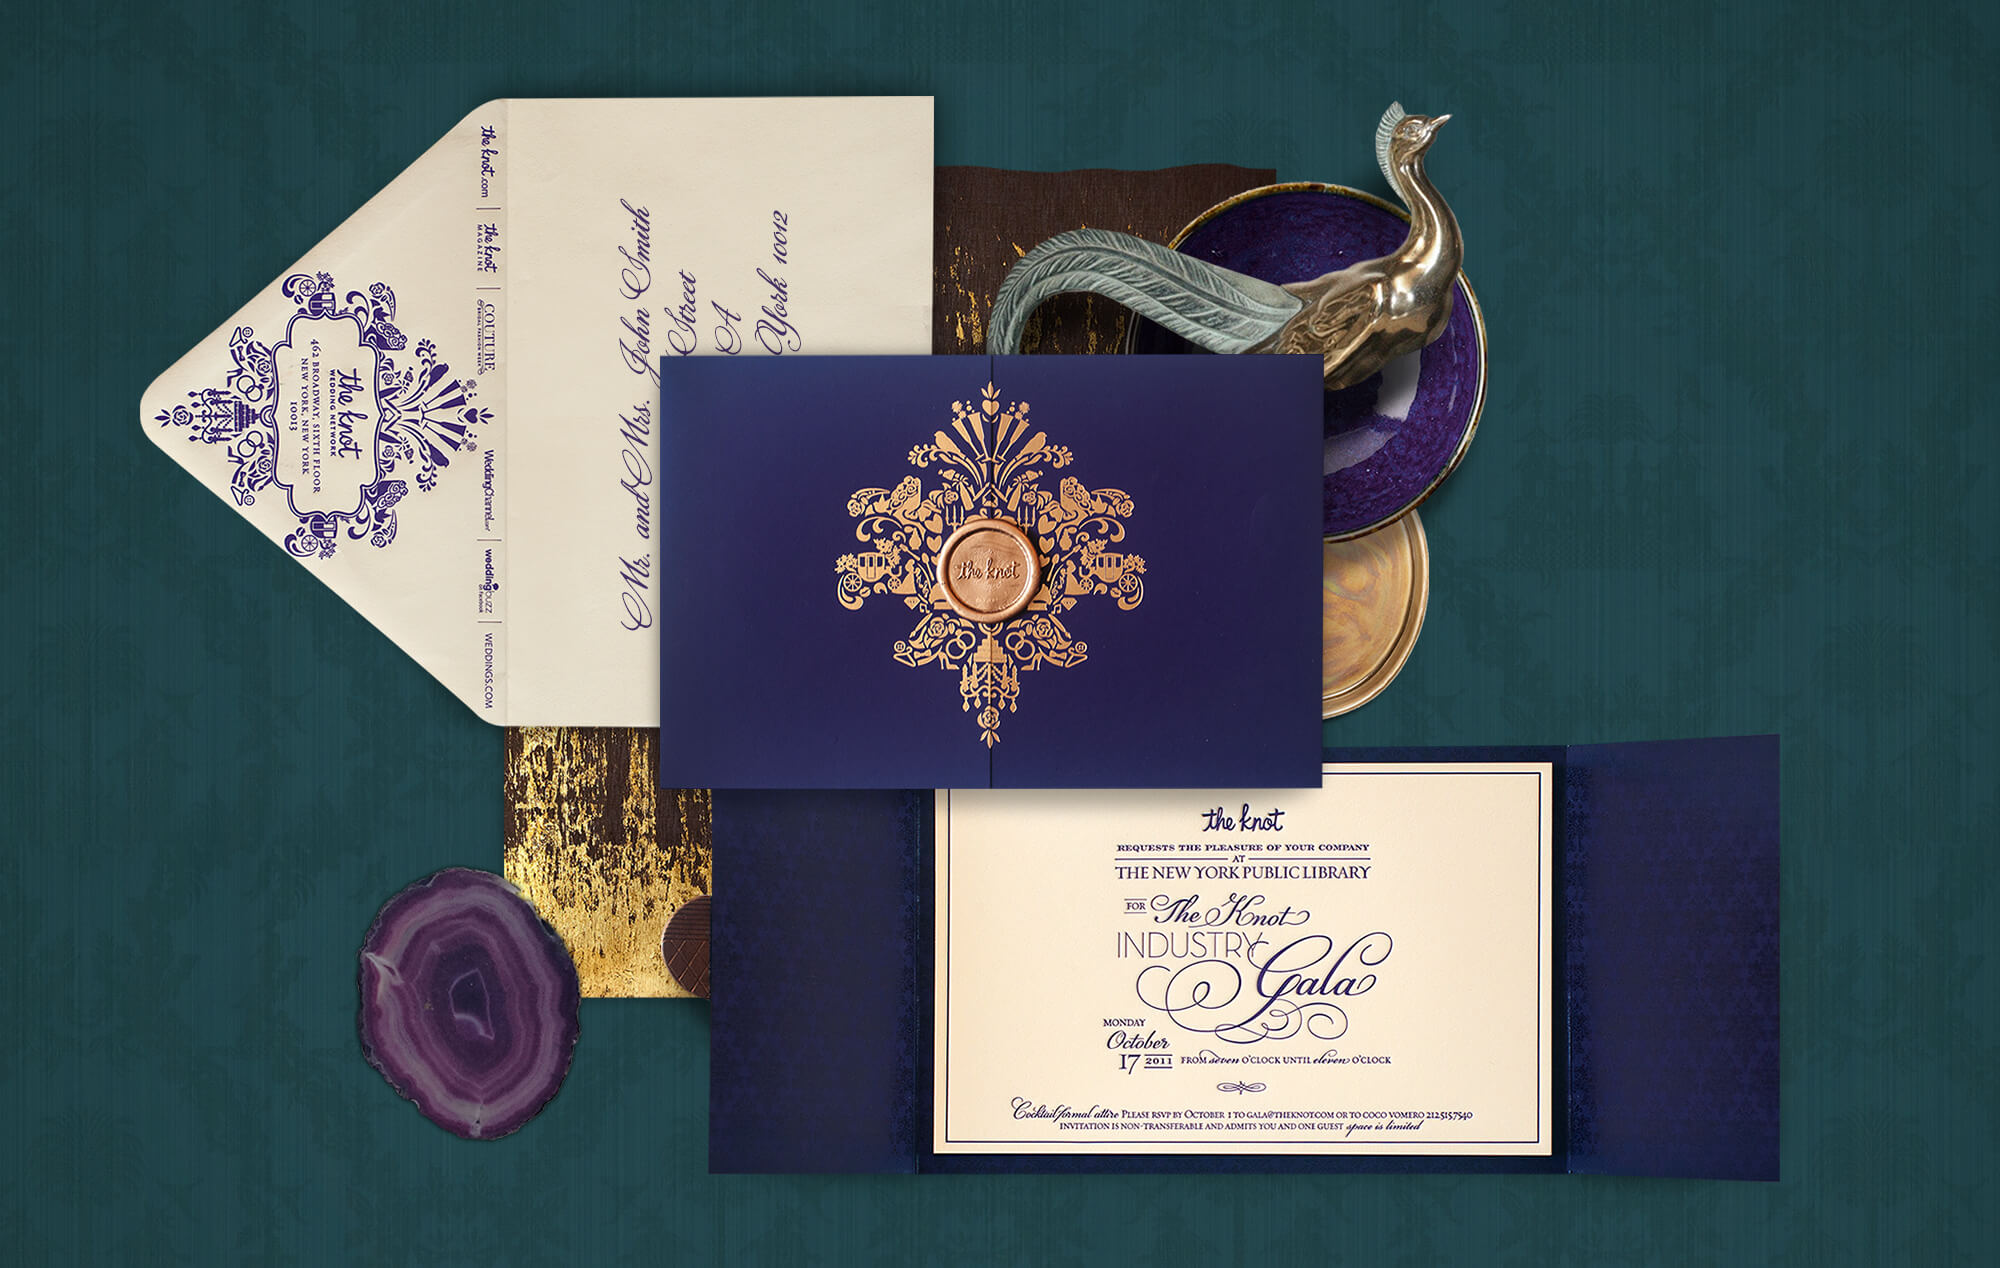 Corporate wedding gala invitation for The Knot